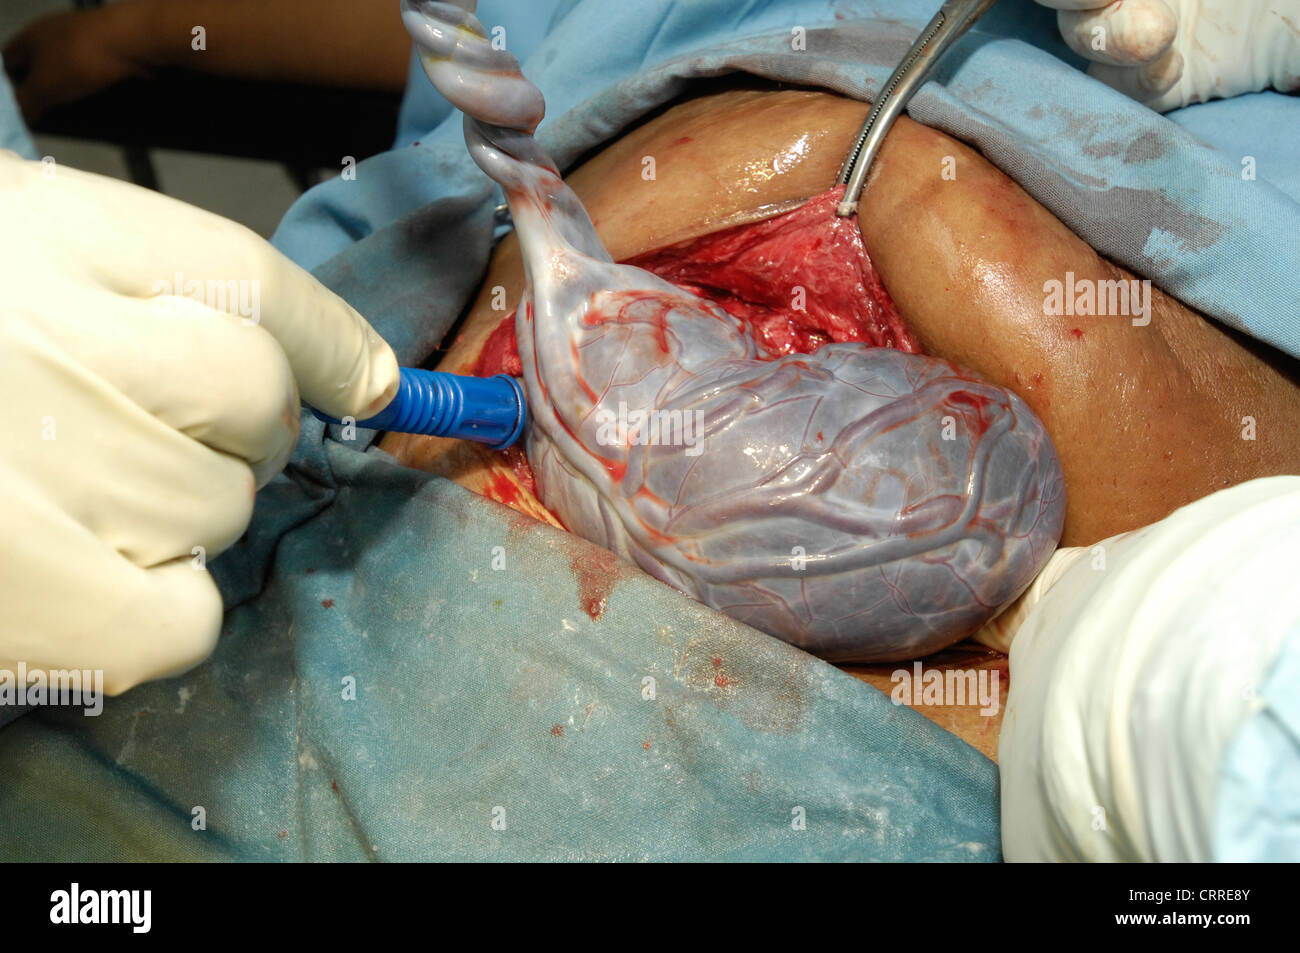 Human placenta, following its removal after a cesarean delivery. Stock Photo